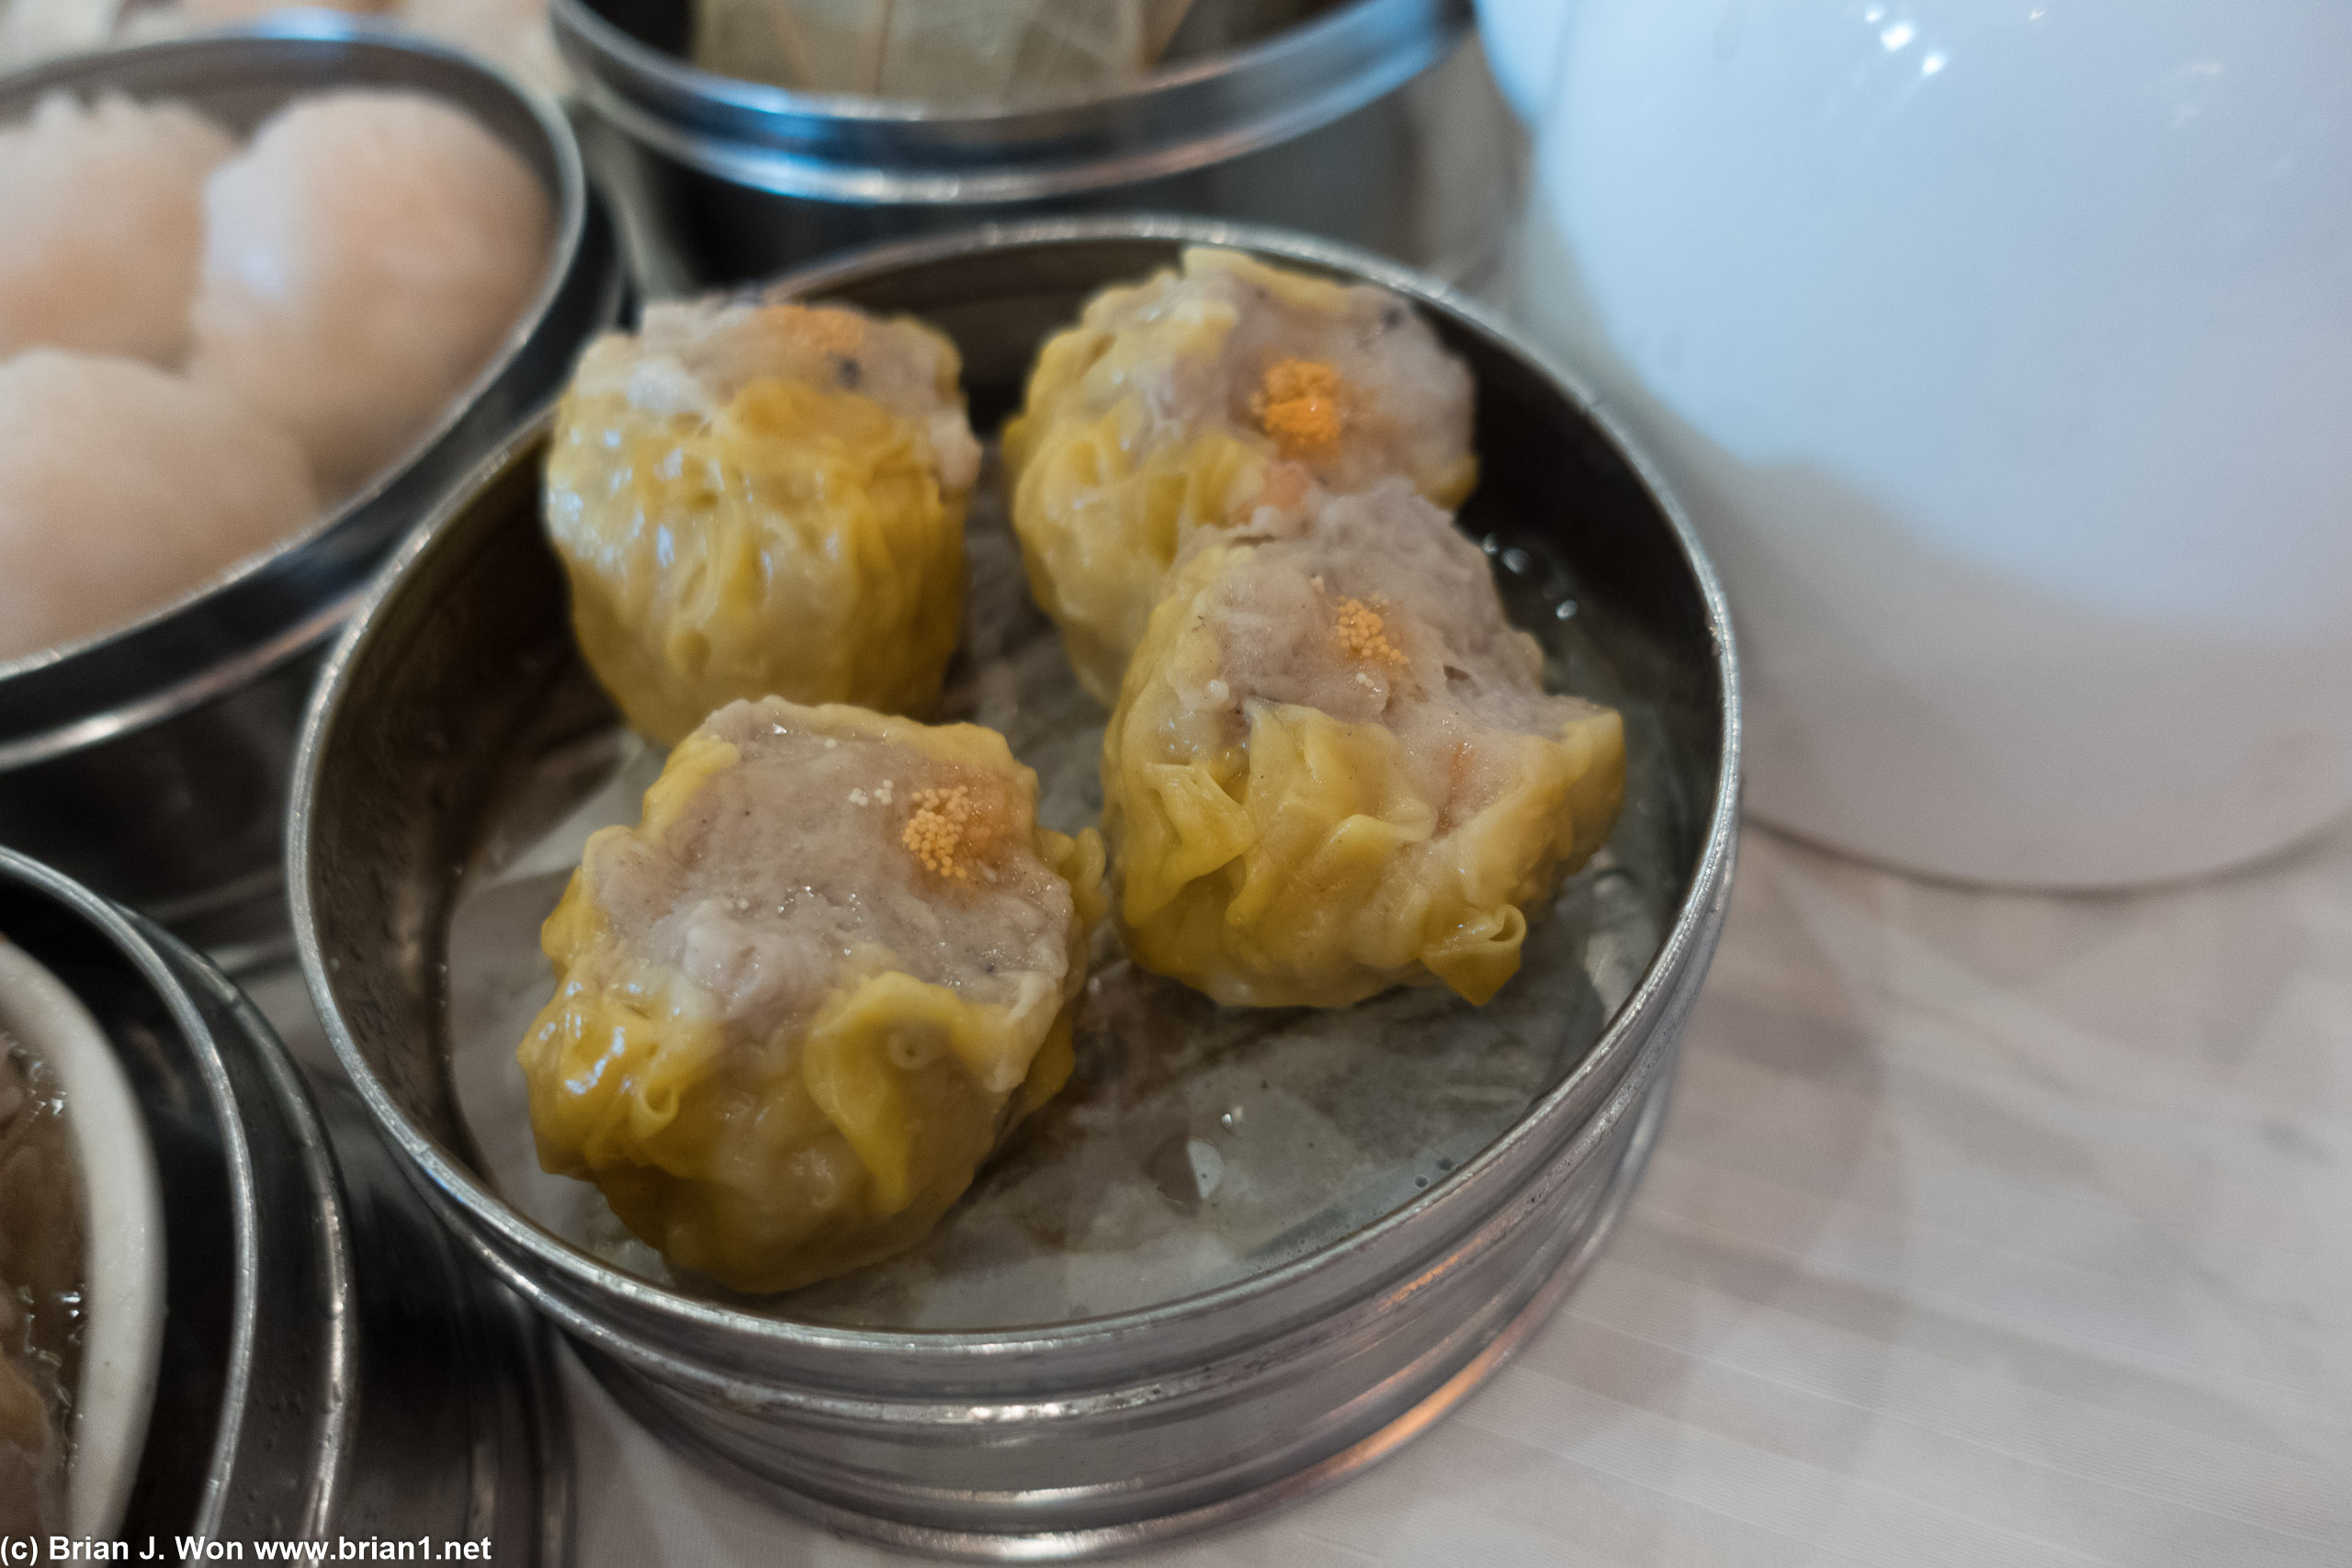 Shu mai flavor was forgettable, but they were plump enough.